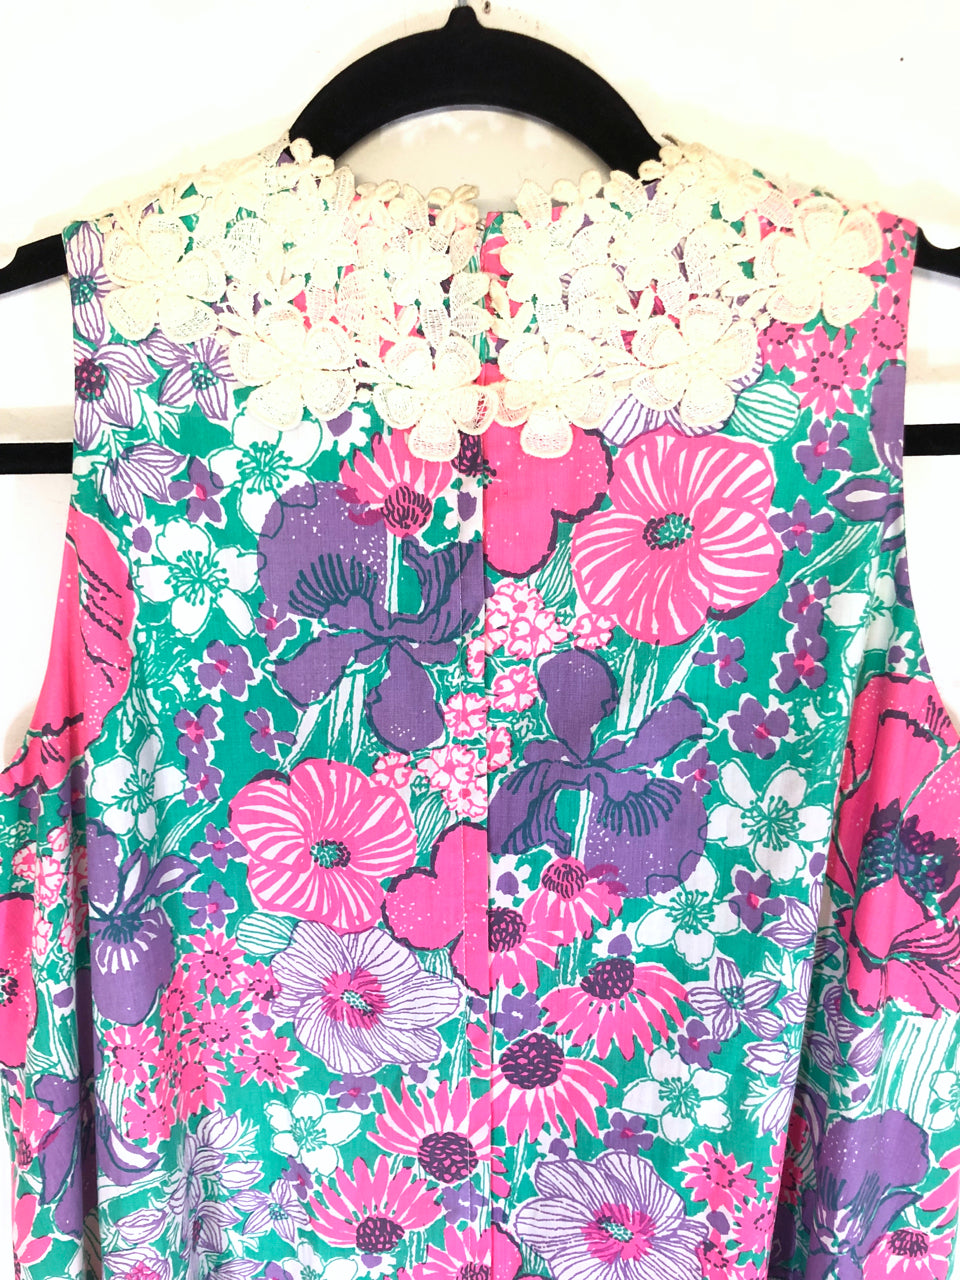 The Lilly Lilly Pulitzer Floral Maxi Dress with Belt